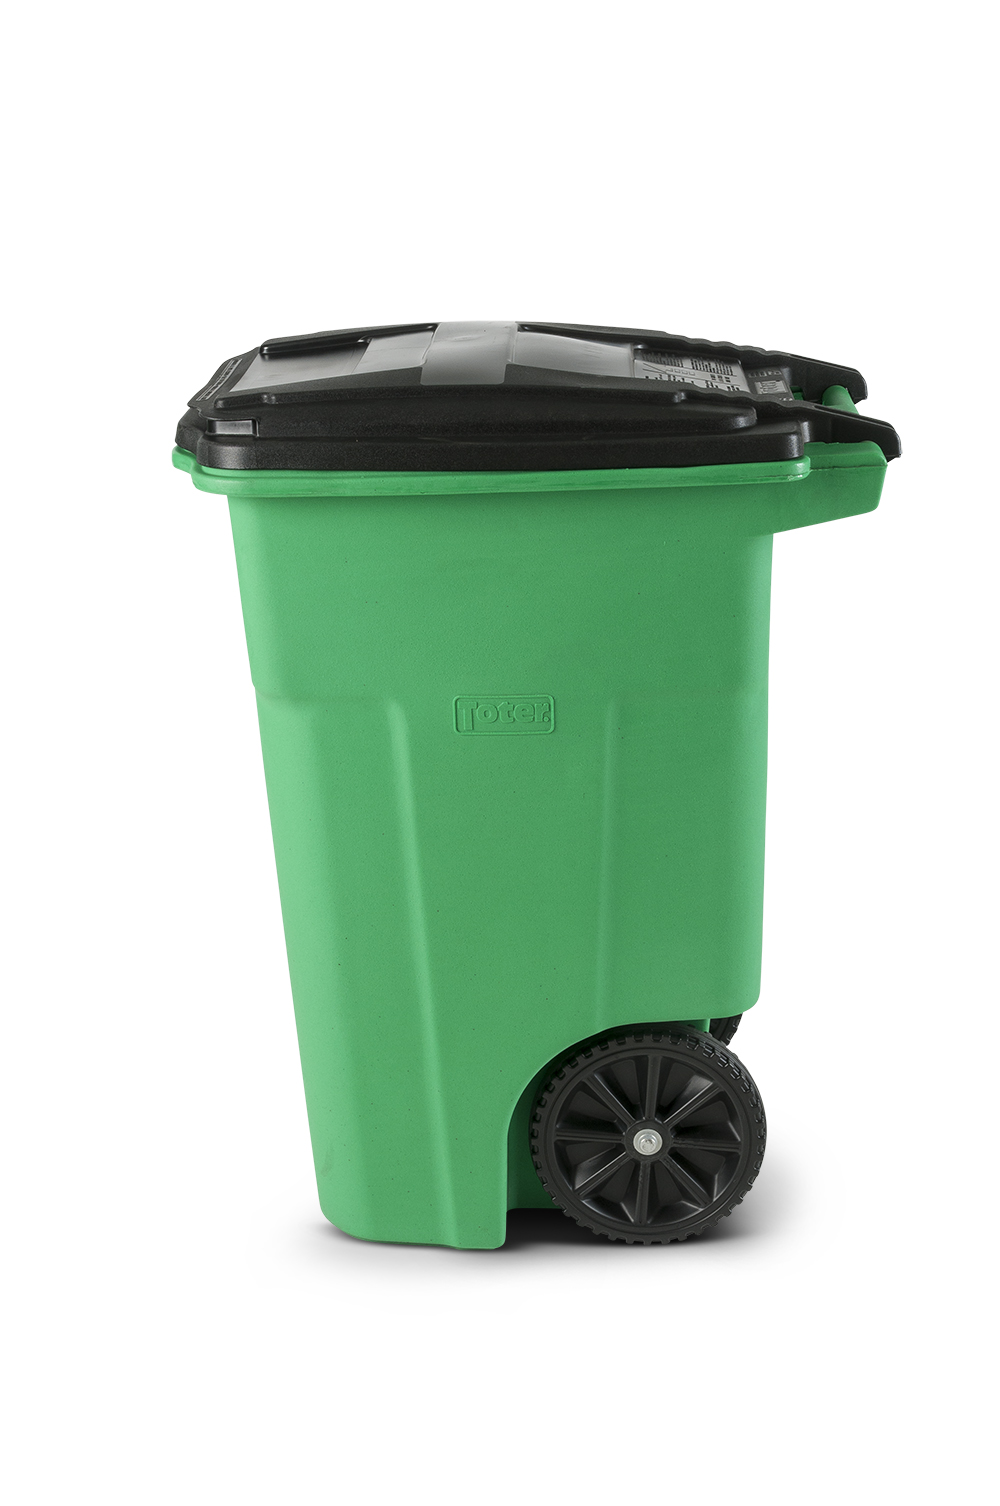 Two-Wheel Carts (Trash Cans)